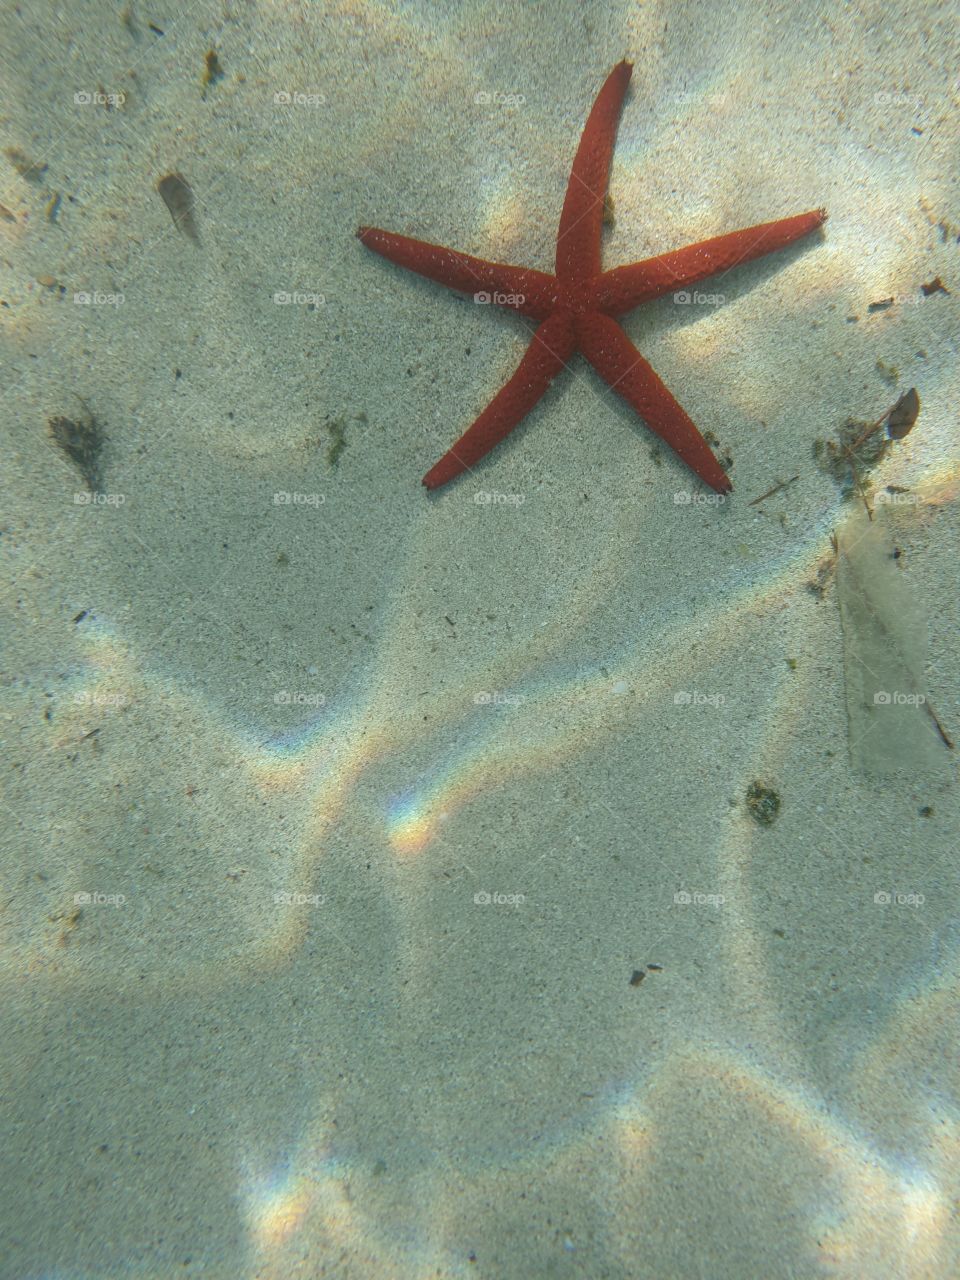 A Starfish in the lower Water